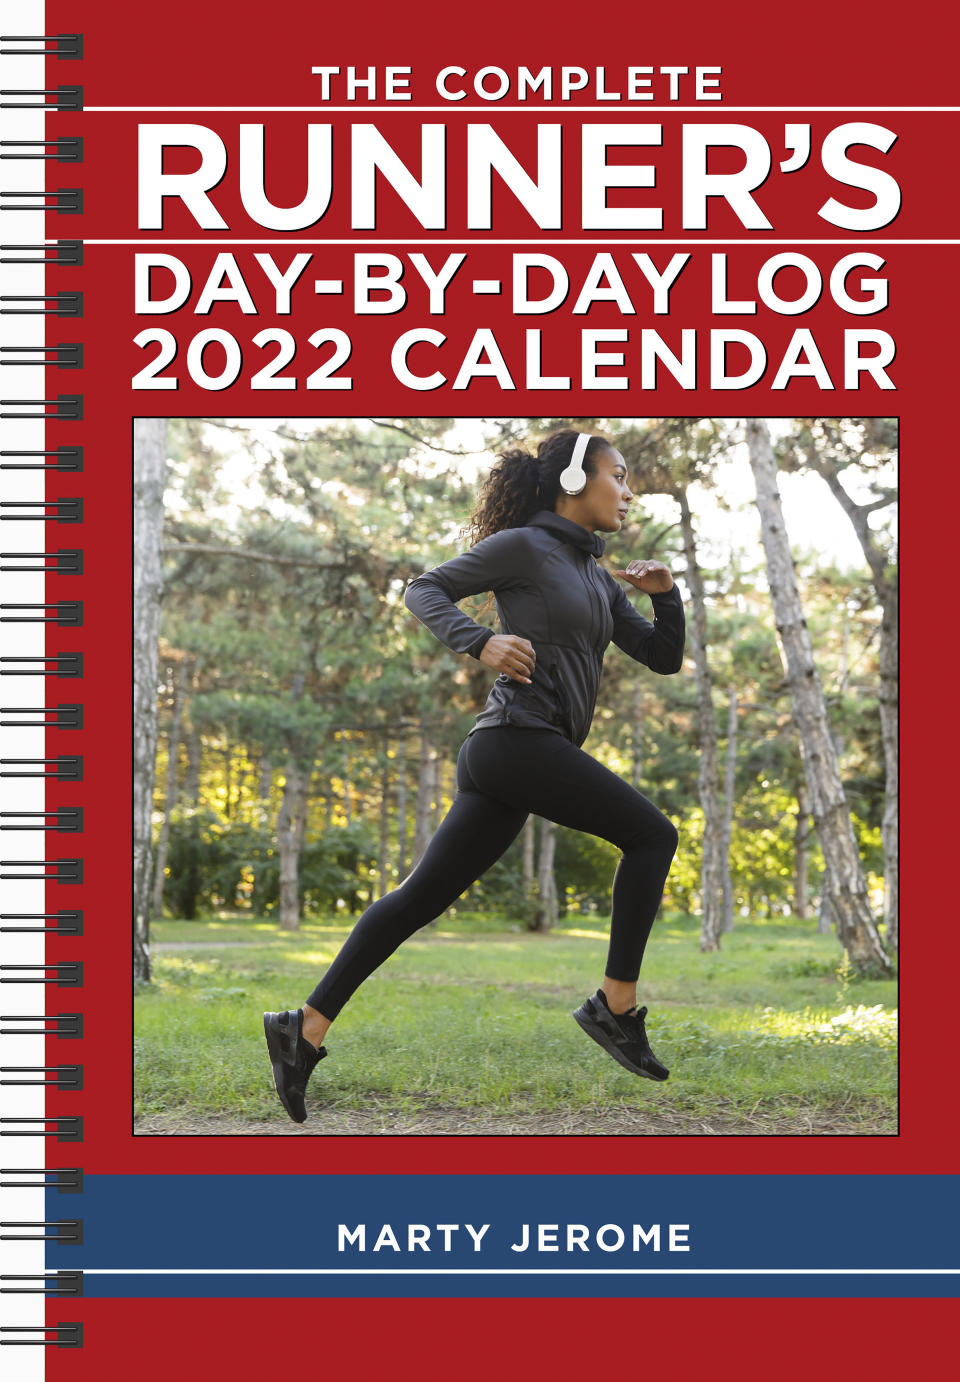 This image provided by Andrews McMeel Publishing shows the The complete runner's calendar. Amateur athletes would go for The Complete Runner's Day by Day calendar, that's a planner and log all in one. There are inspirational monthly essays, helpful tips, and lots of space to track your runs. (Andrews McMeel Publishing via AP)